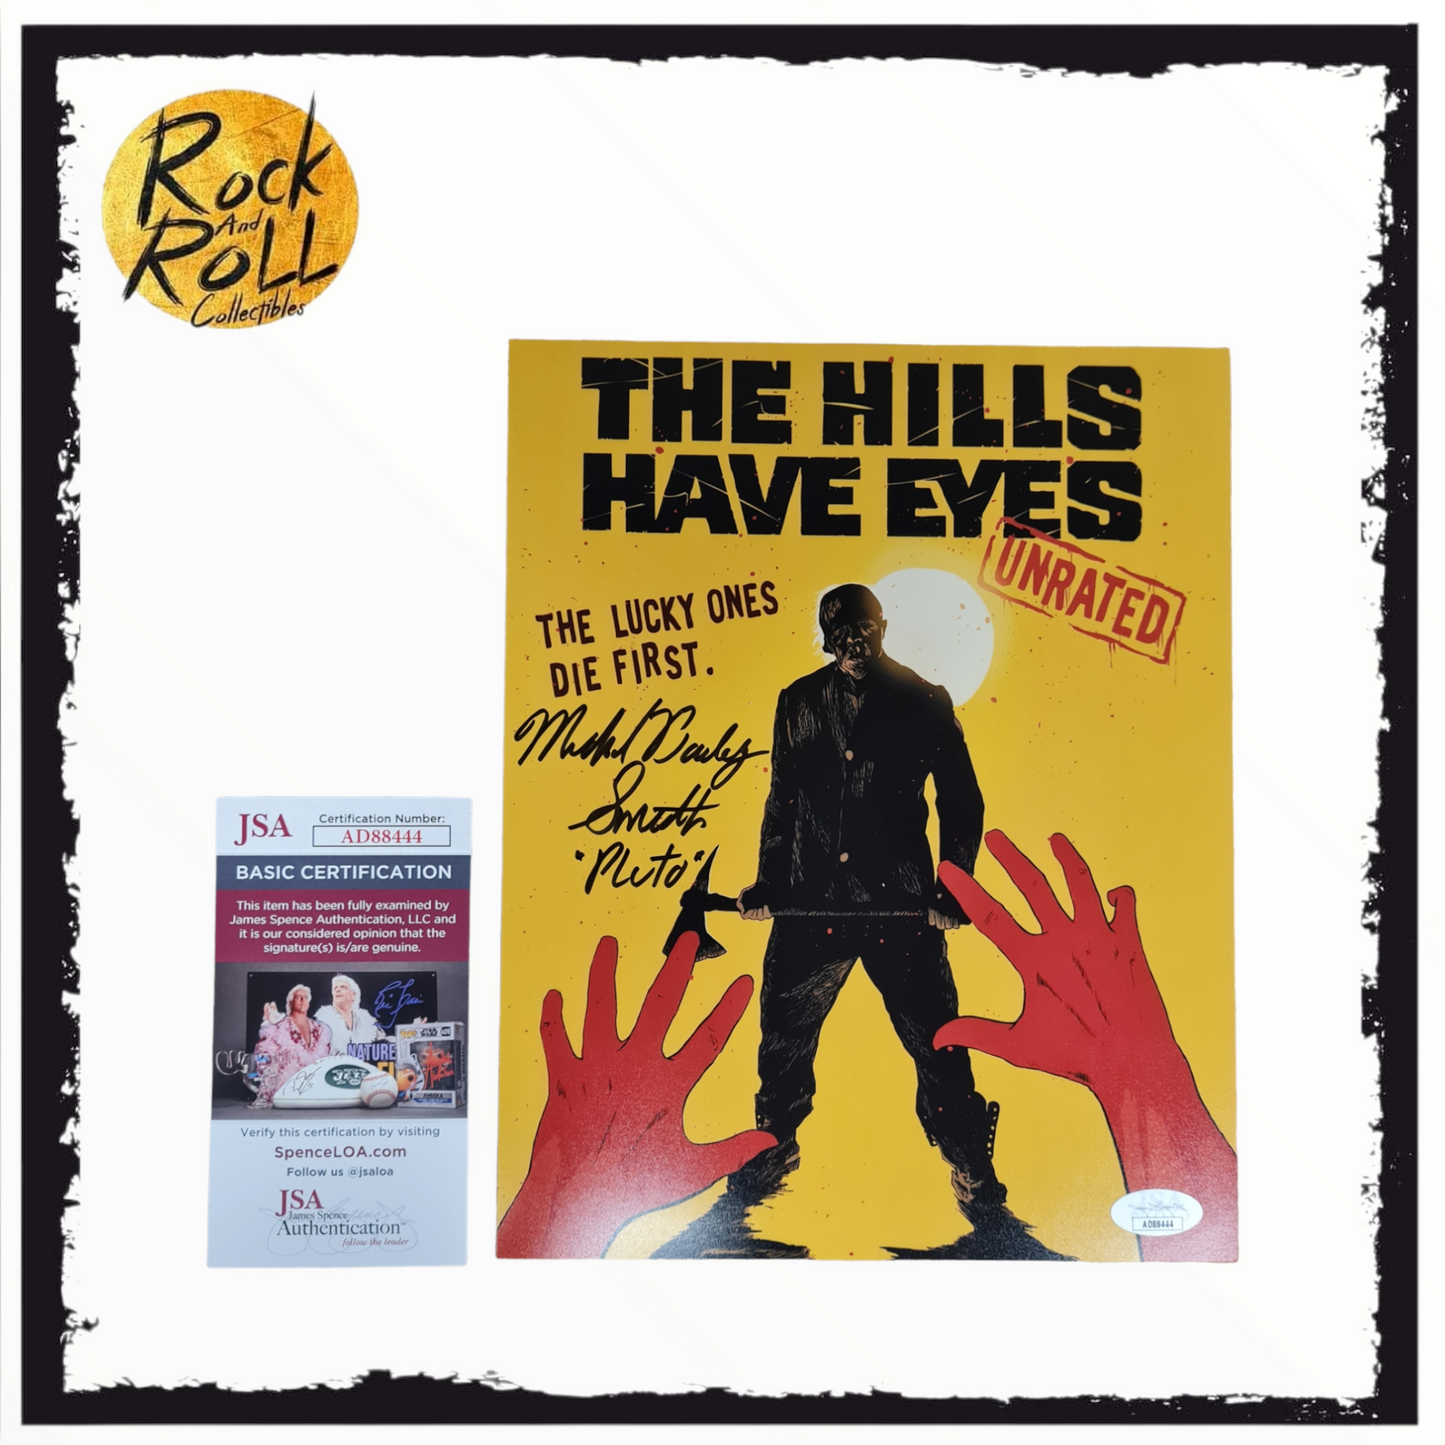 The Hills Have Eyes Print Signed by Michael Bailey Smith "Pluto" w/JSA COA